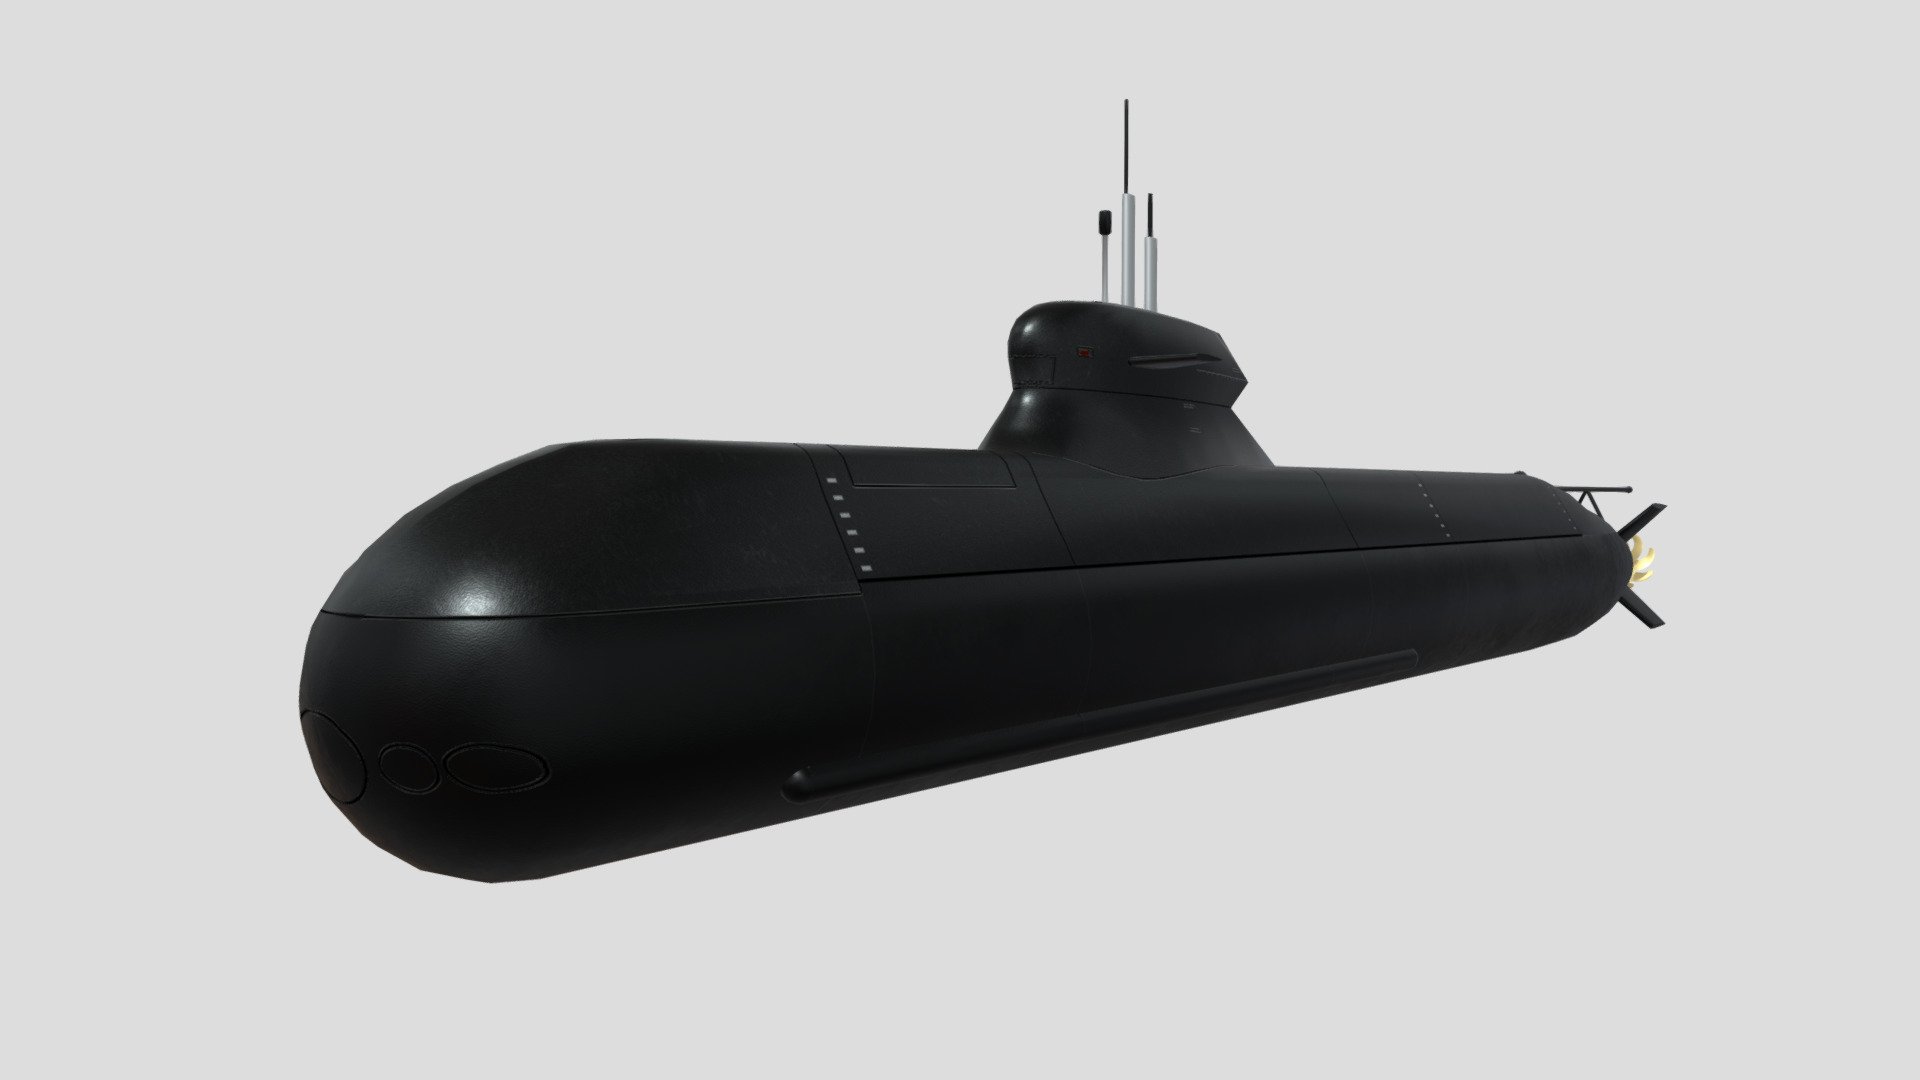 The next generation of submarines developed by Kockums for the Swedish Navy first planned at the beginning of the 1990s, currently under construction and planned to be delivered no later than 2022, a date subsequently pushed back, initially to 2024-24 and subsequently even further to 2027-28.

The first two submarines to be delivered are HSwMS Blekinge and HSwMS Skåne 3d model